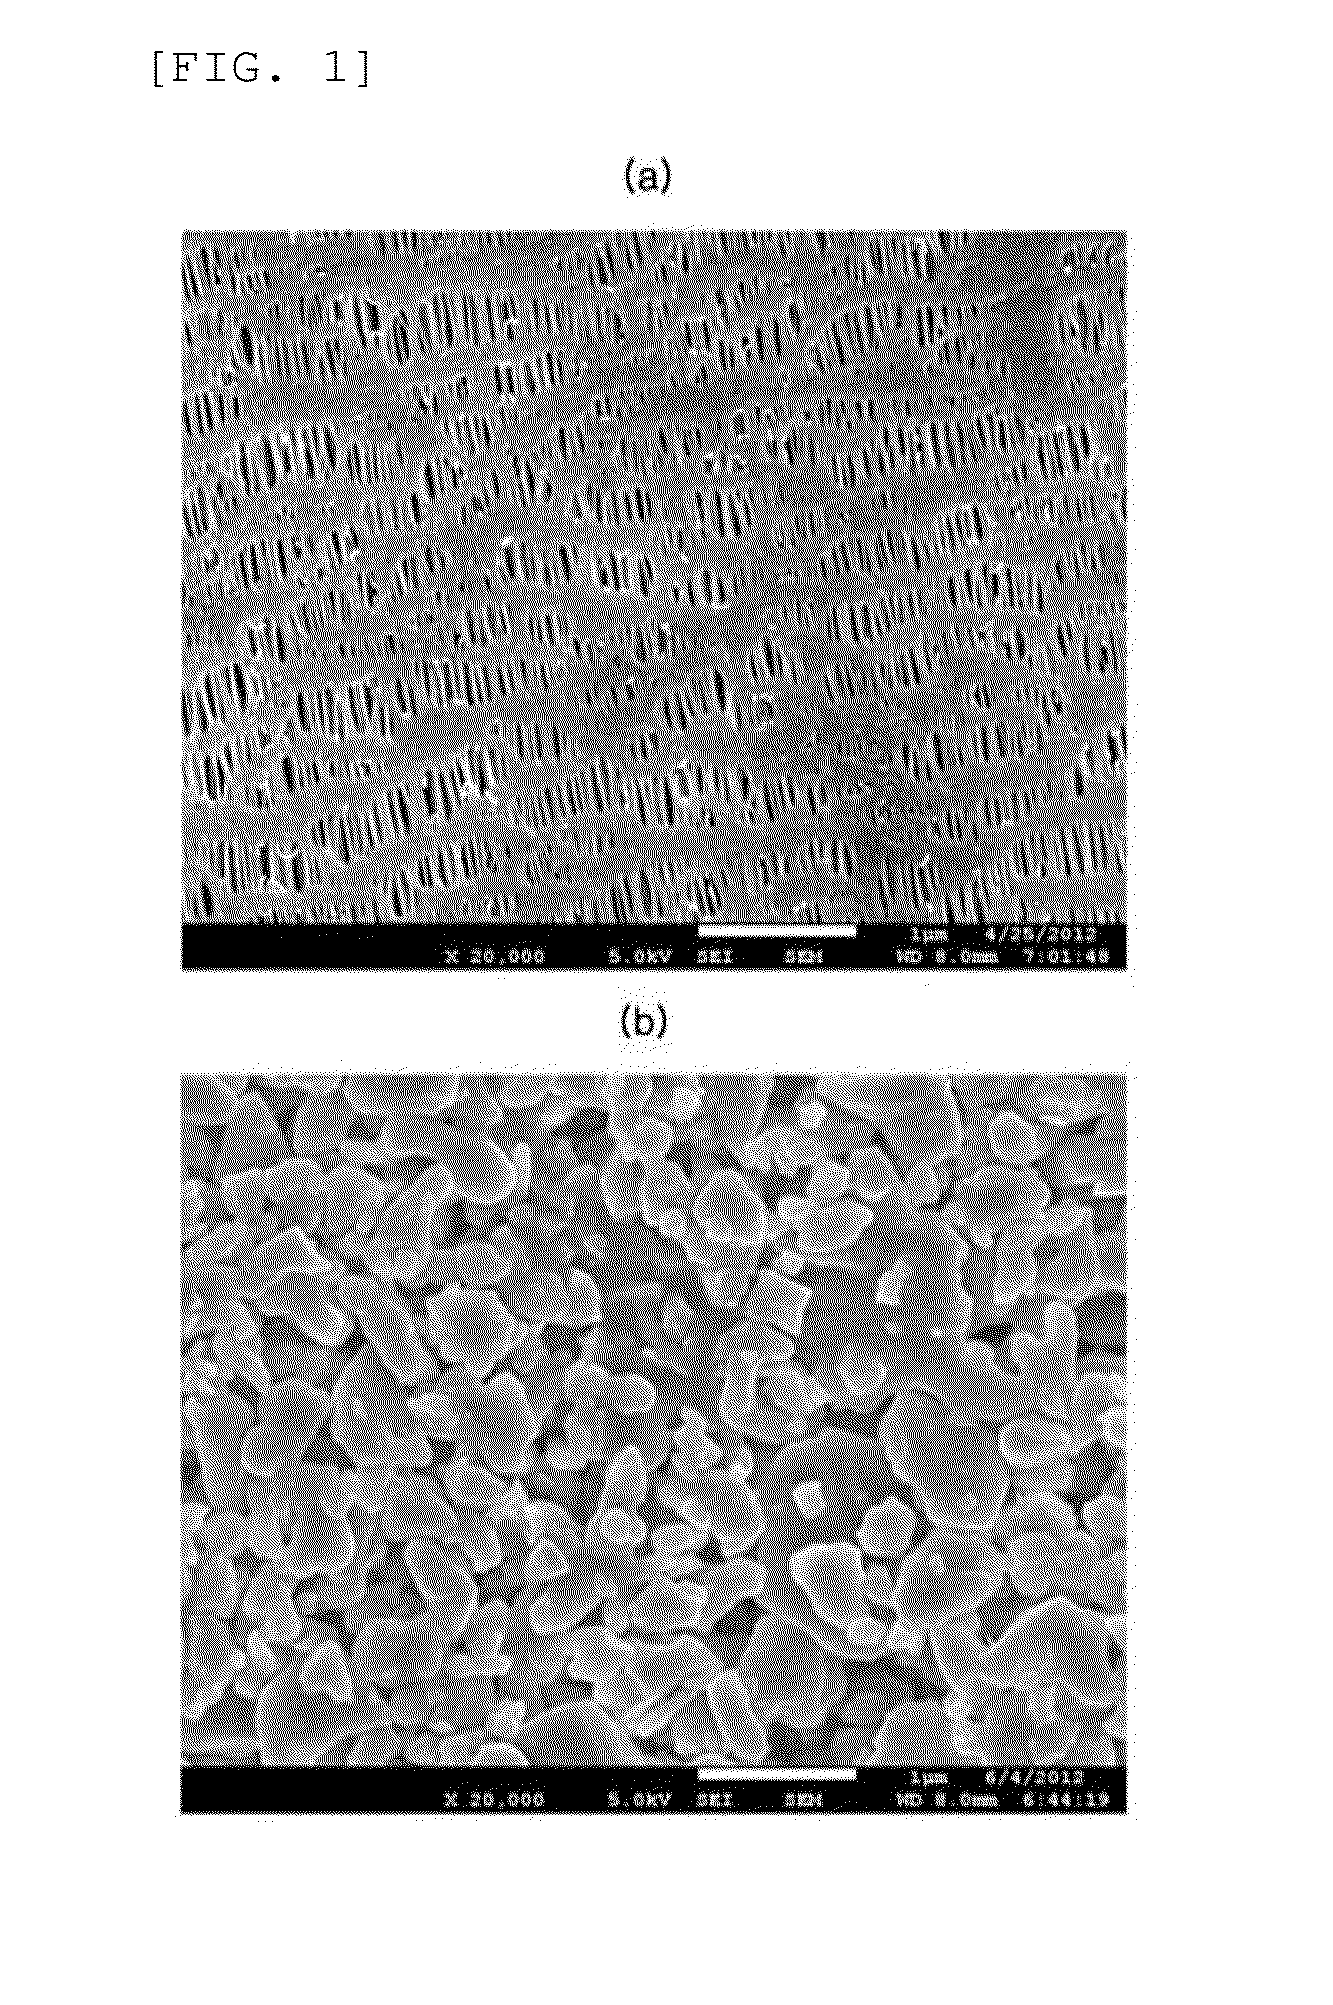 Porous separator coated with organic/inorganic complex using aqueous coating solution, method for manufacturing same, and electrochemical device using same